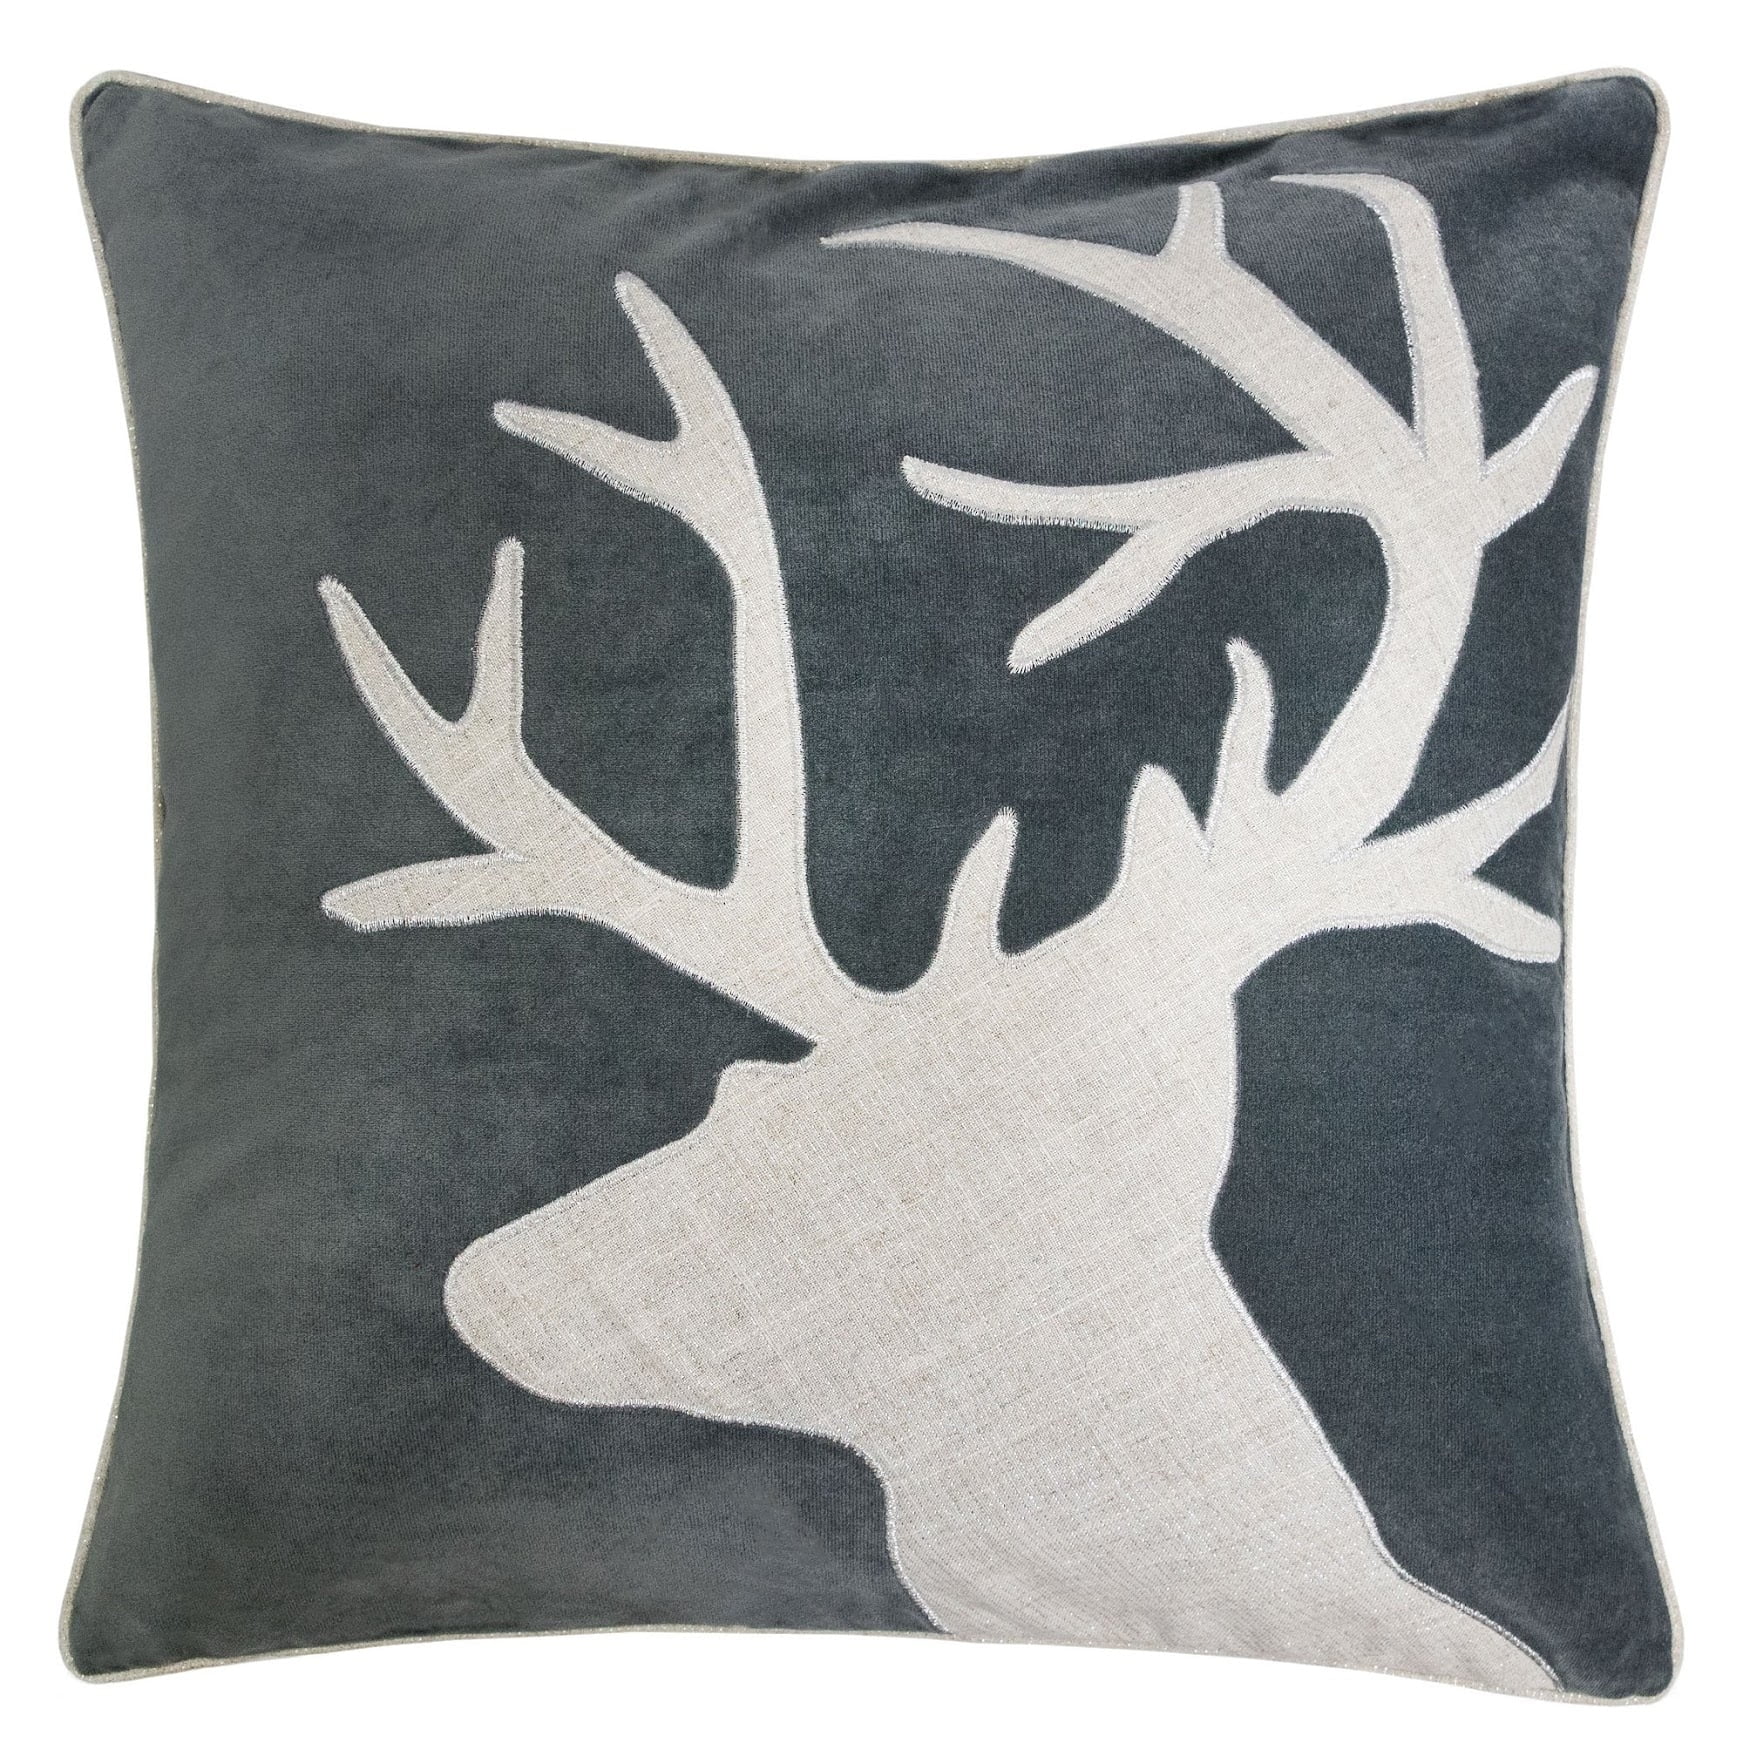 Homey Cozy Christmas Reindeer Throw Pillow Cover & Insert - On